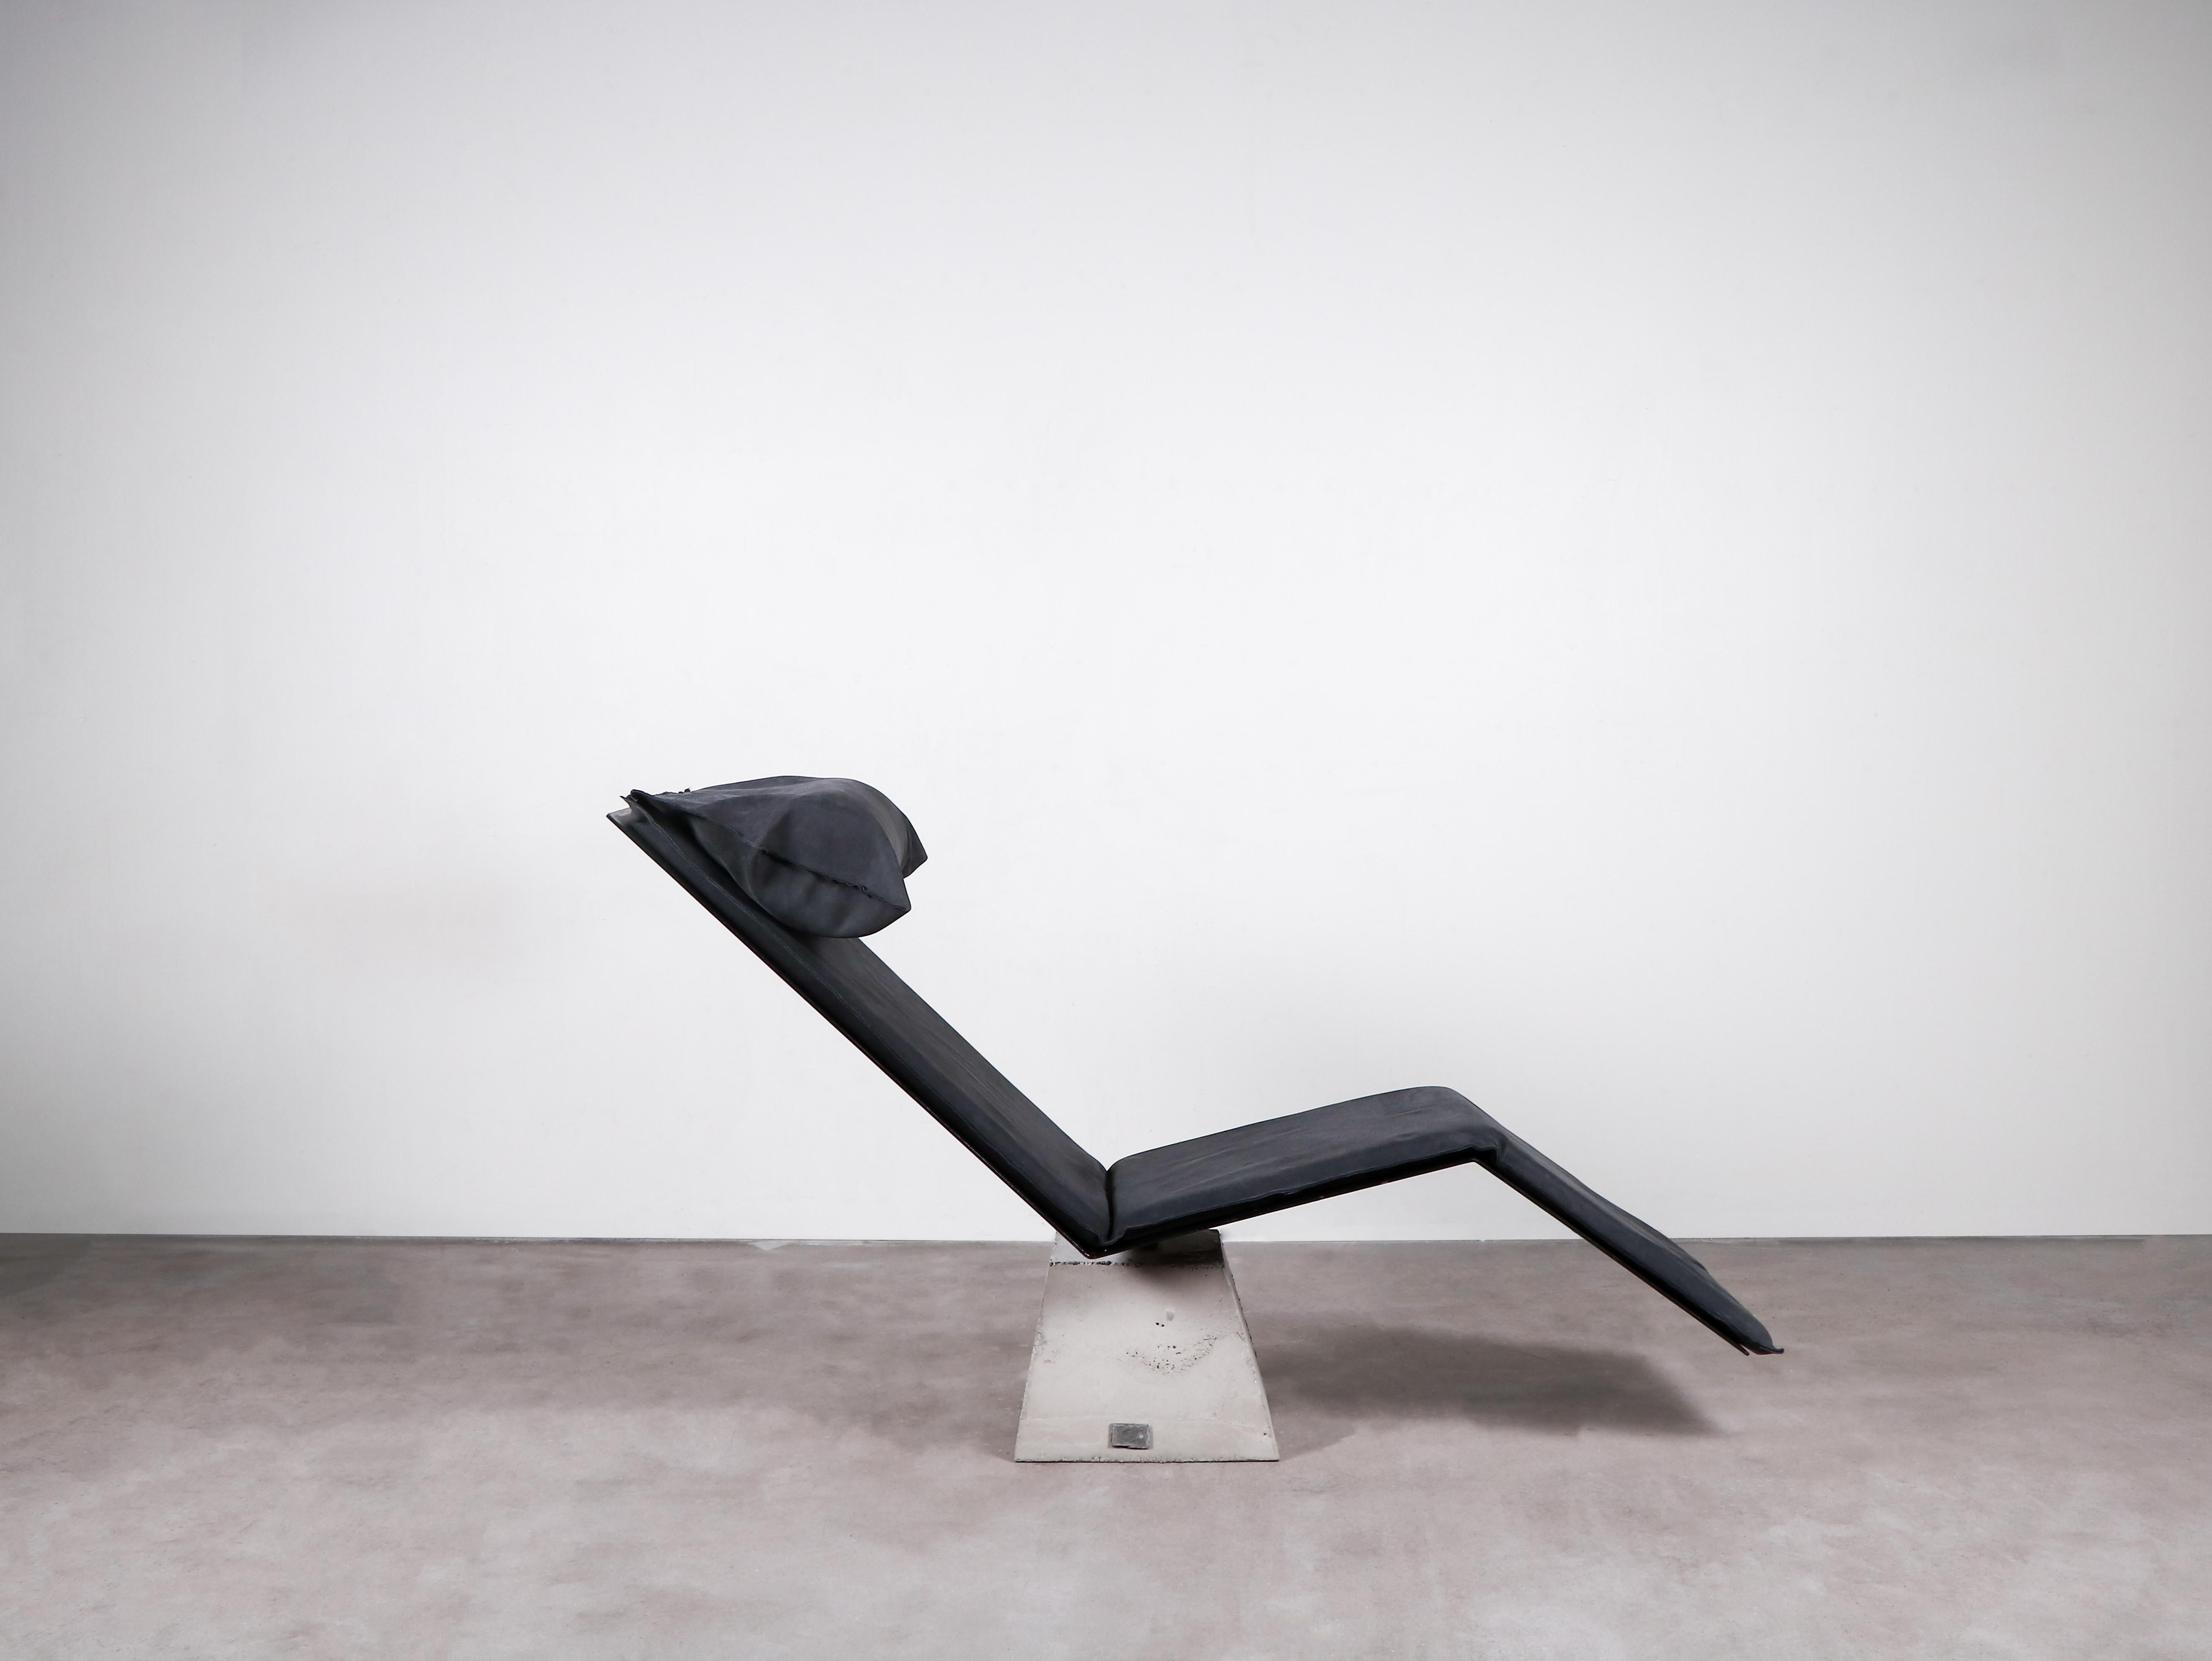 Upholstery Contemporary Black Lounge Chair / Chaise Lounge, Flykt Chair by Lucas Morten